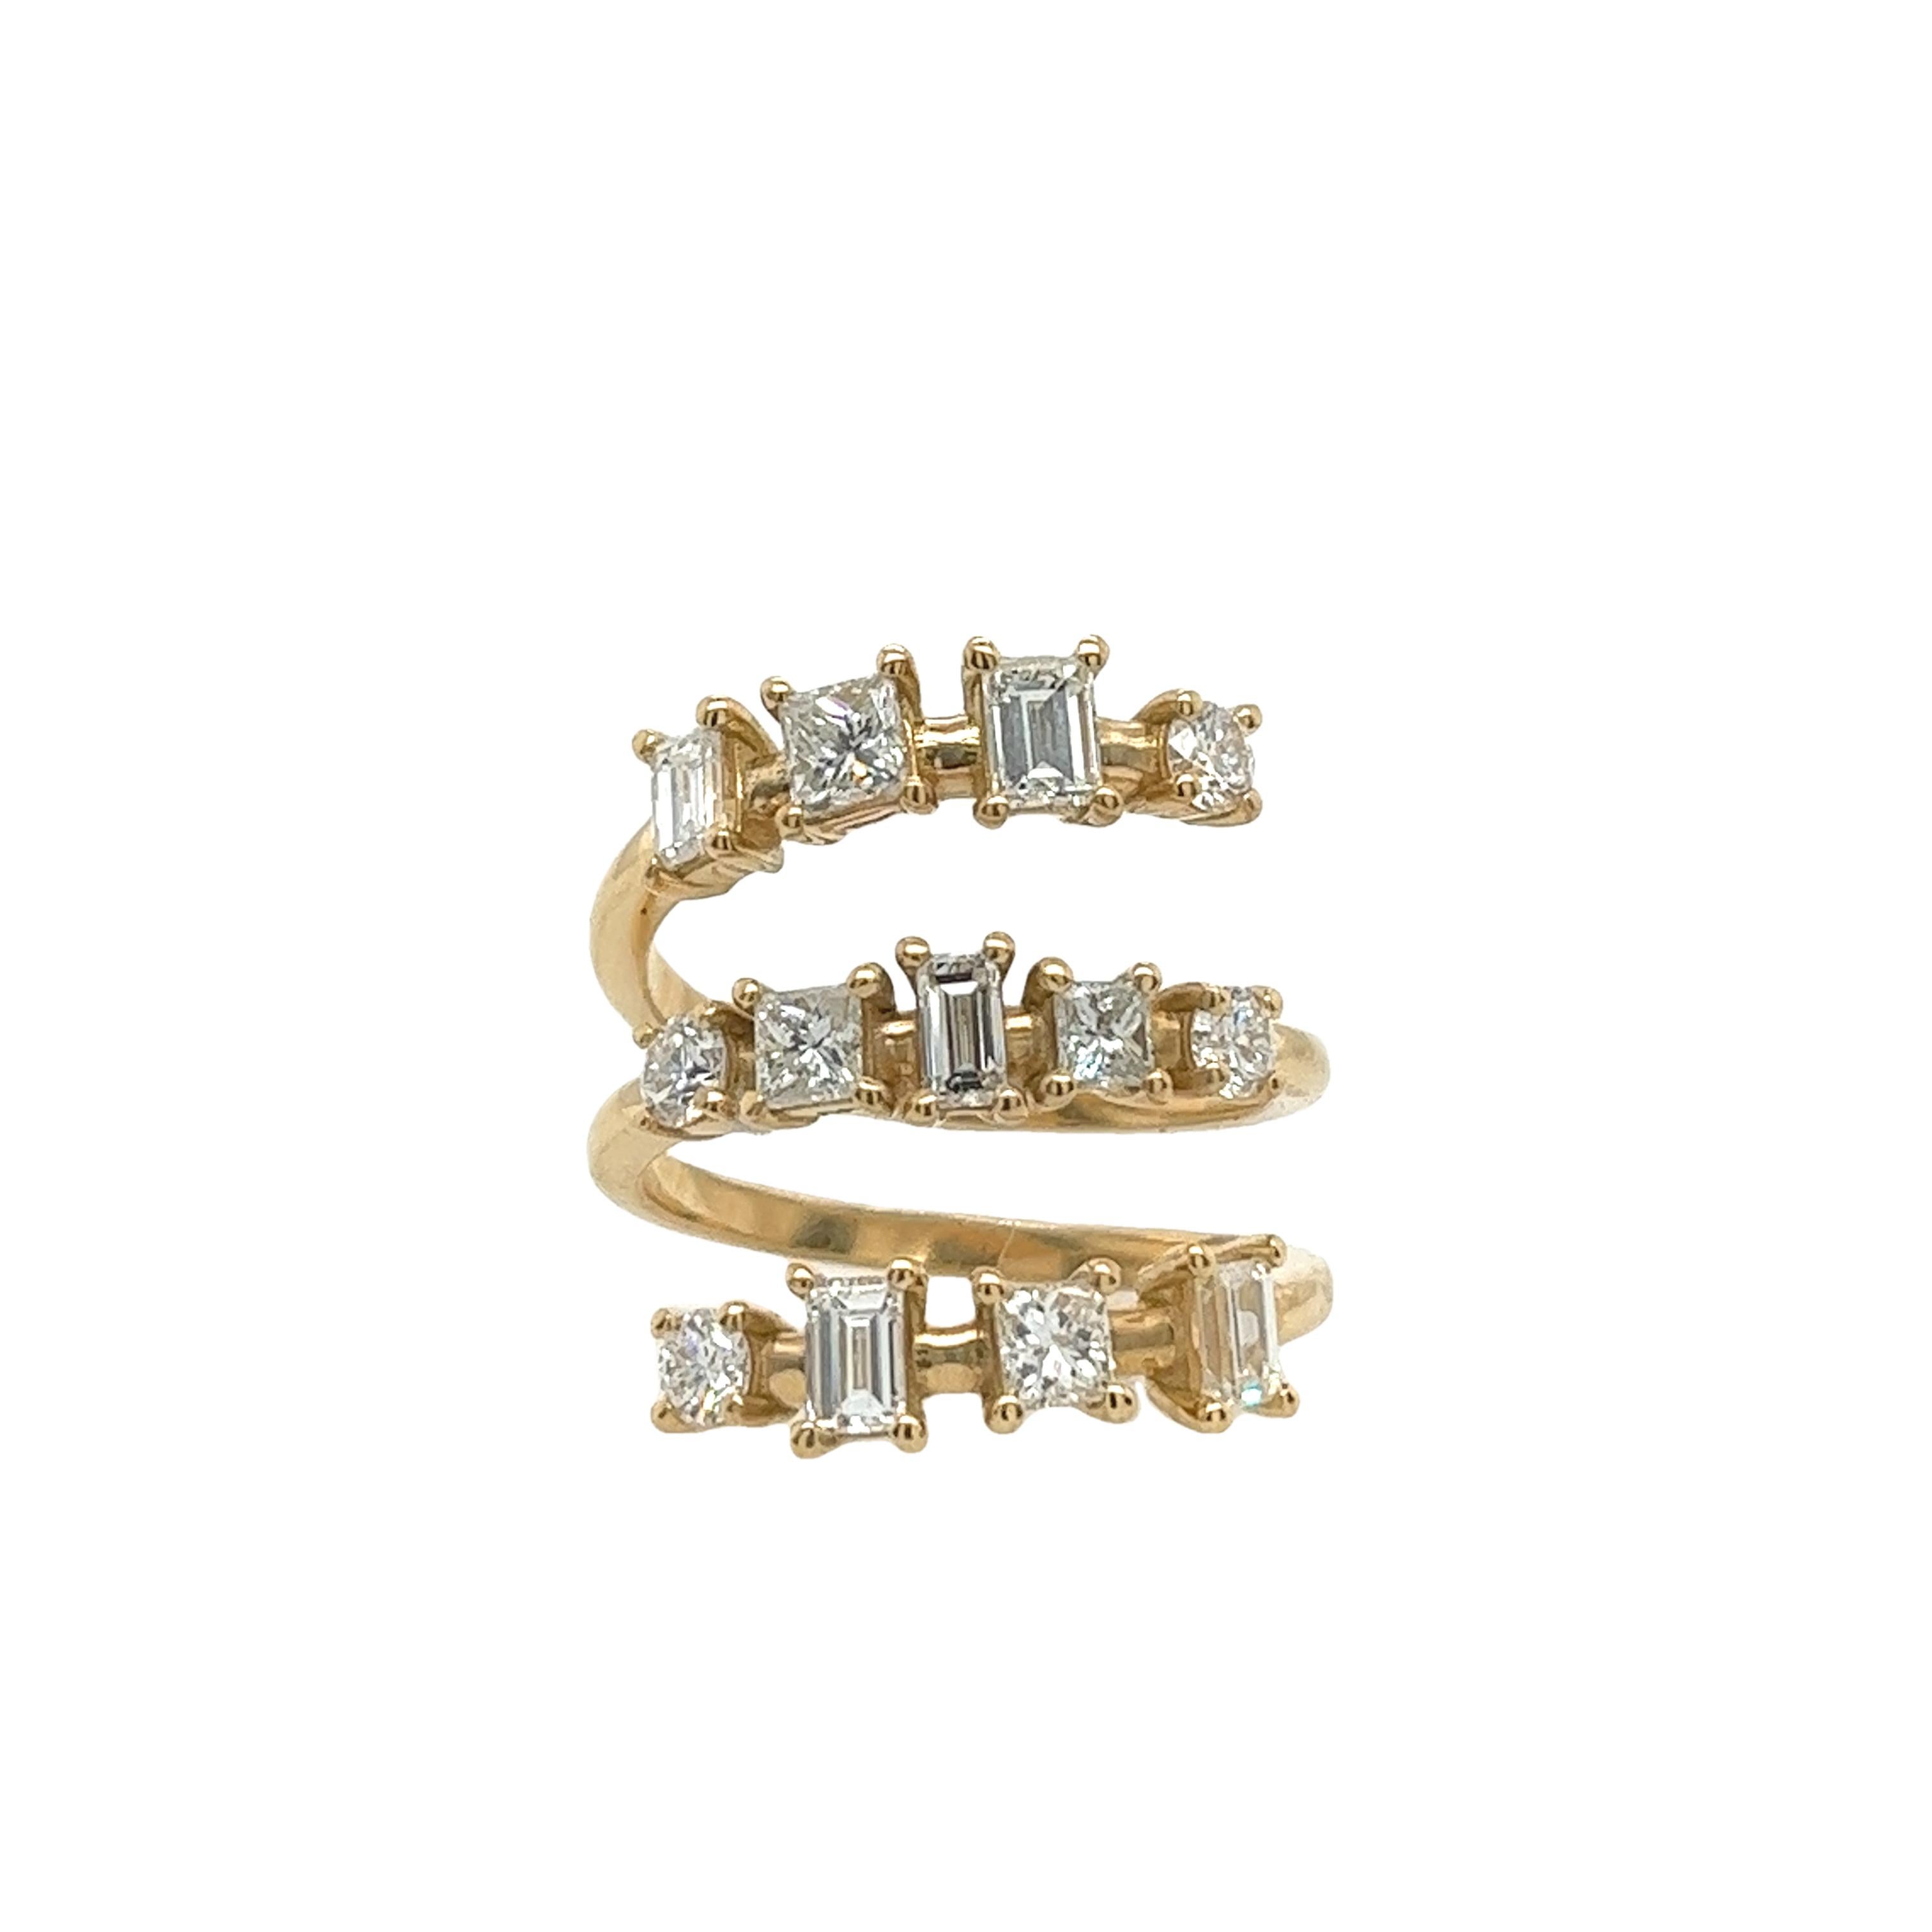 Multi Diamond Shaped Coil Ring, 2.10ct in total Set in 18ct Yellow Gold For Sale 3